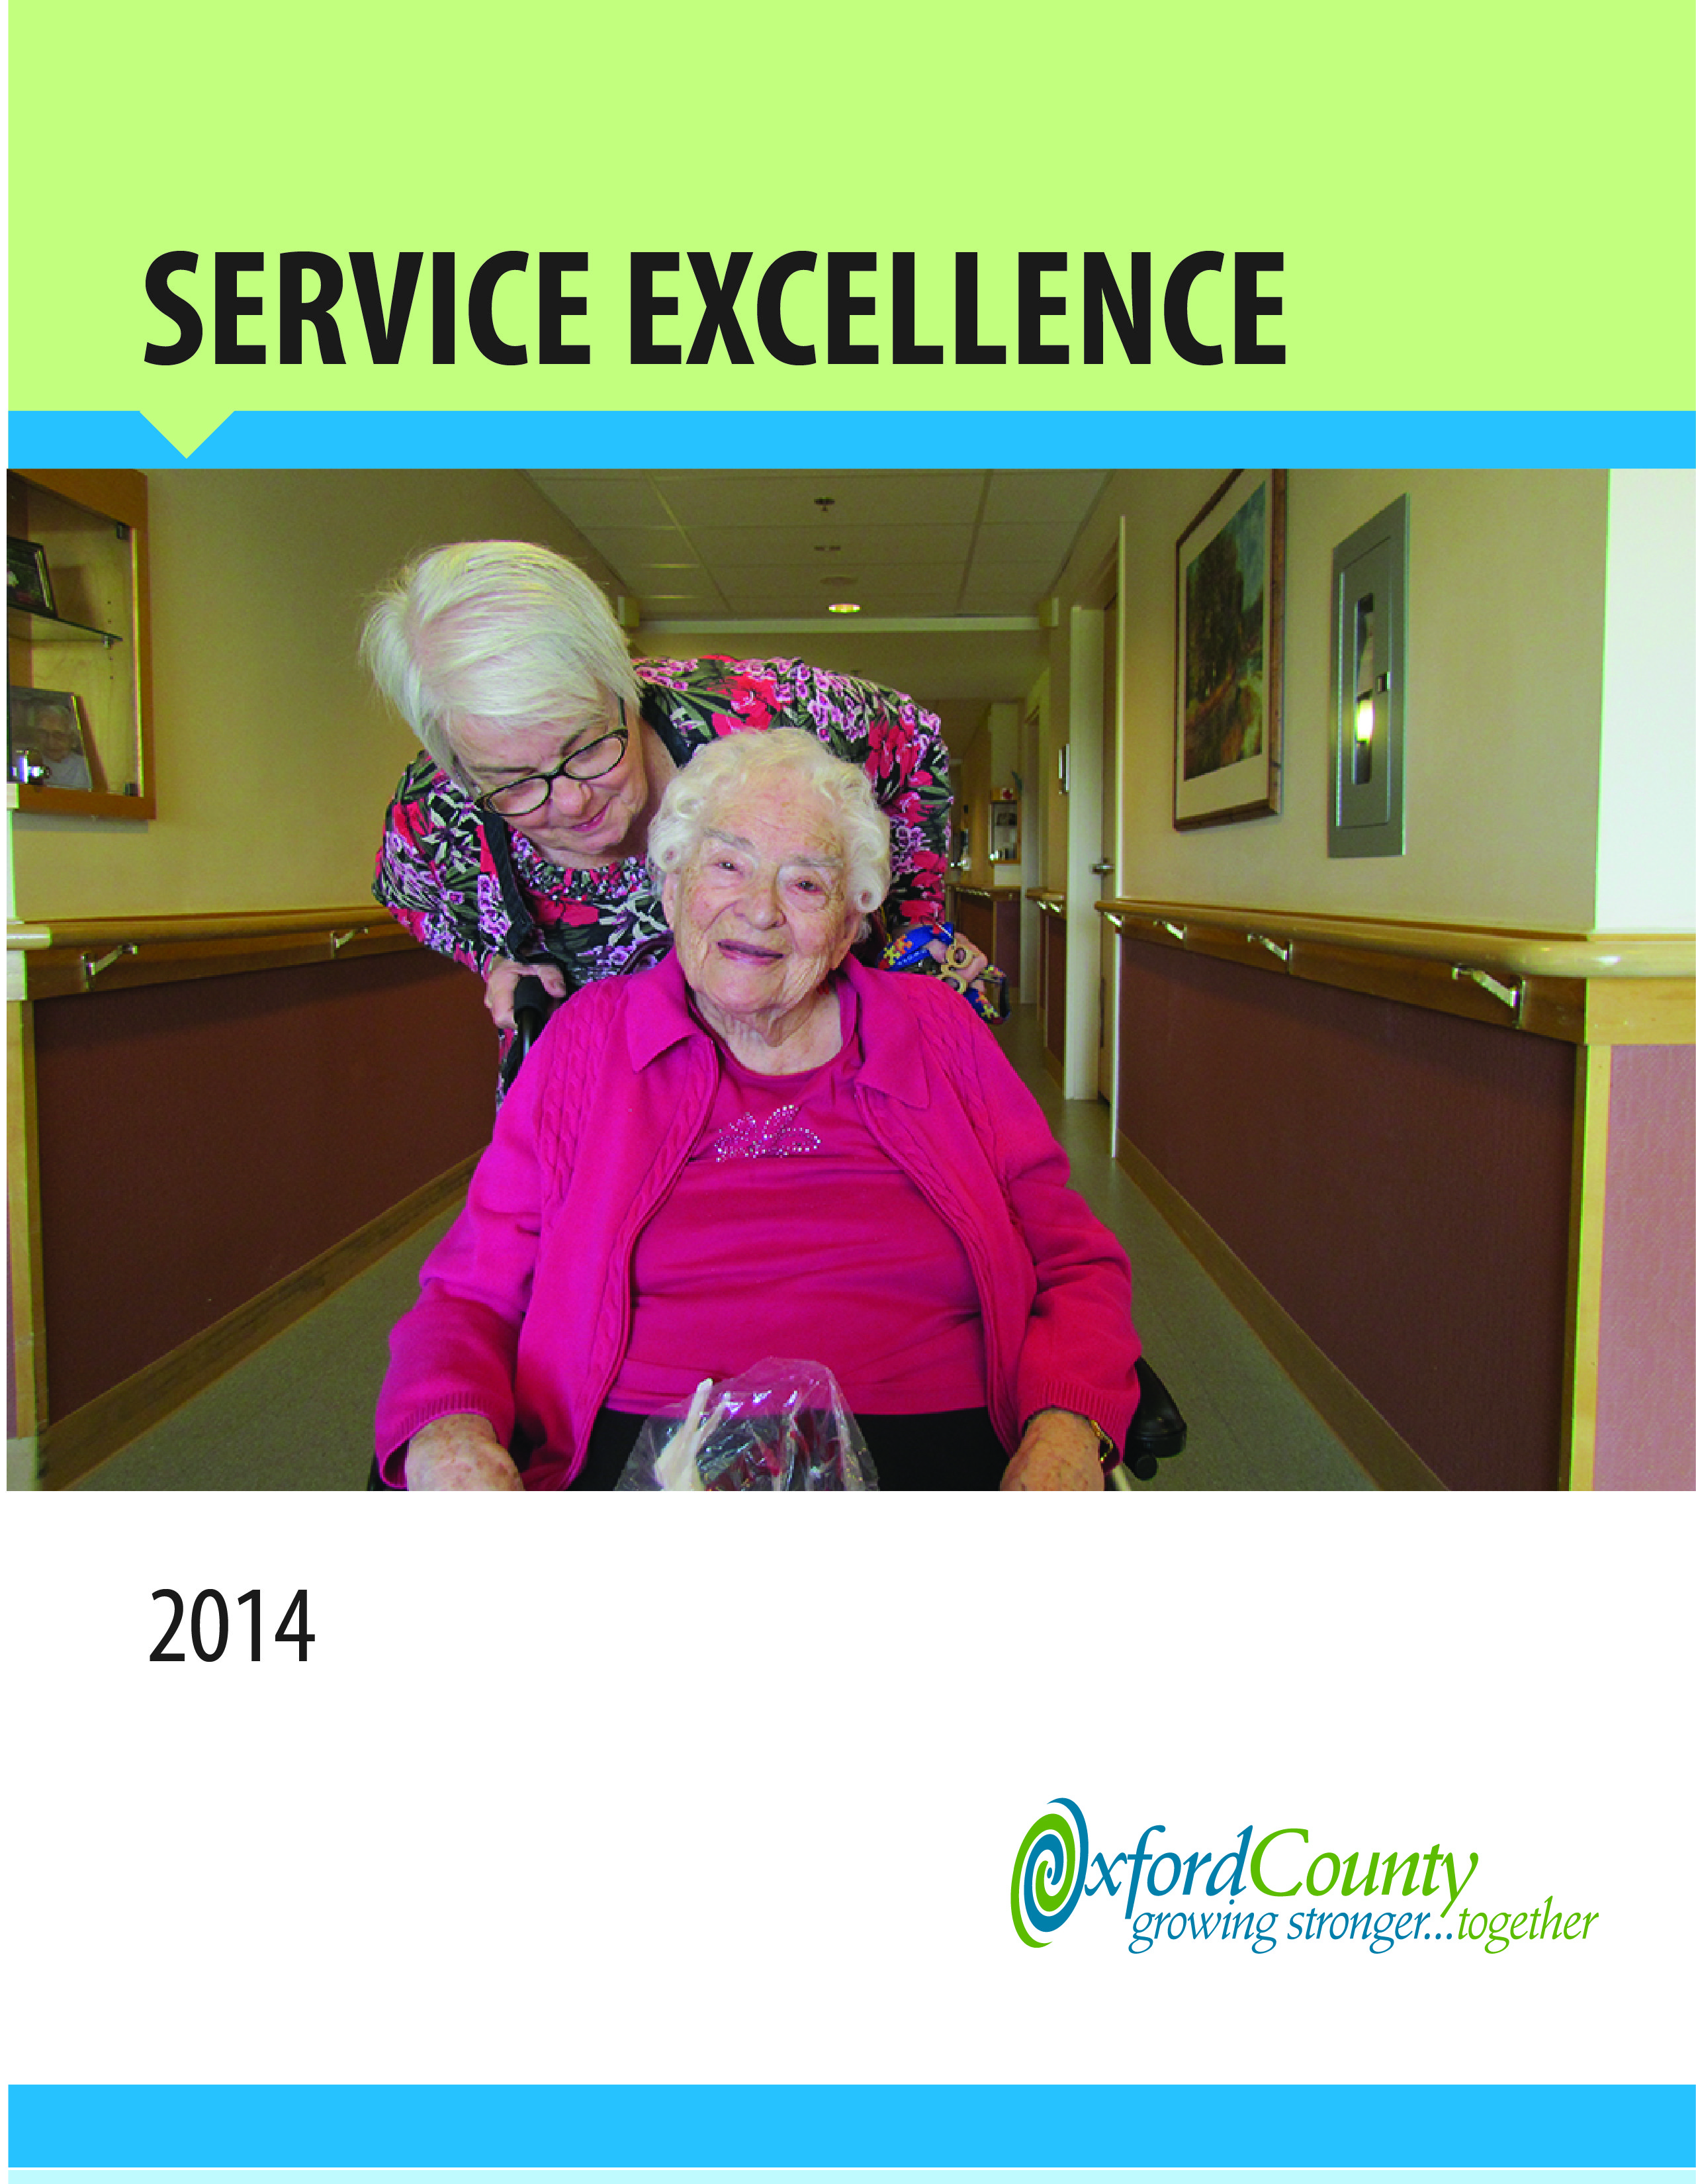 Service excellence report cover - PSW pushing an elderly woman in a wheelchair down the hall